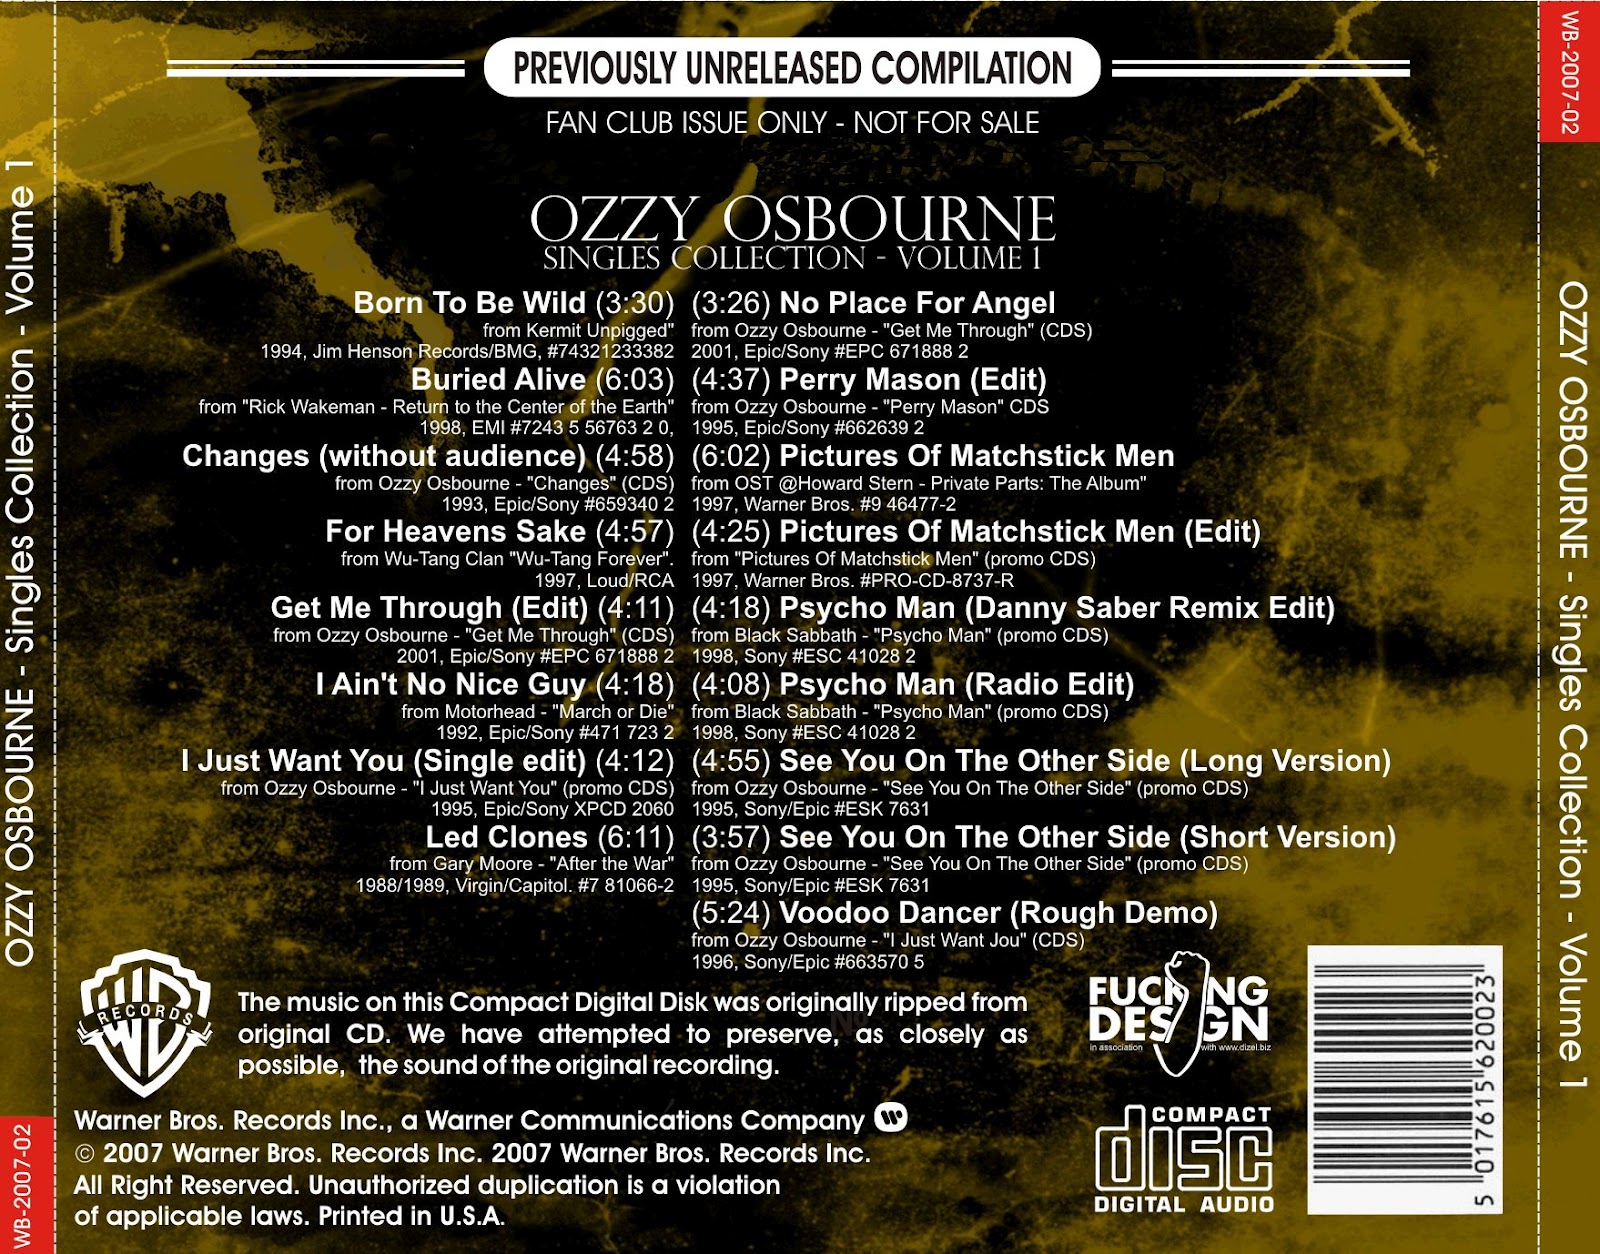 BlooD AnD HonoR MetaL: Ozzy Osbourne - Singles Collection: Volume 1 (2007)1600 x 1254